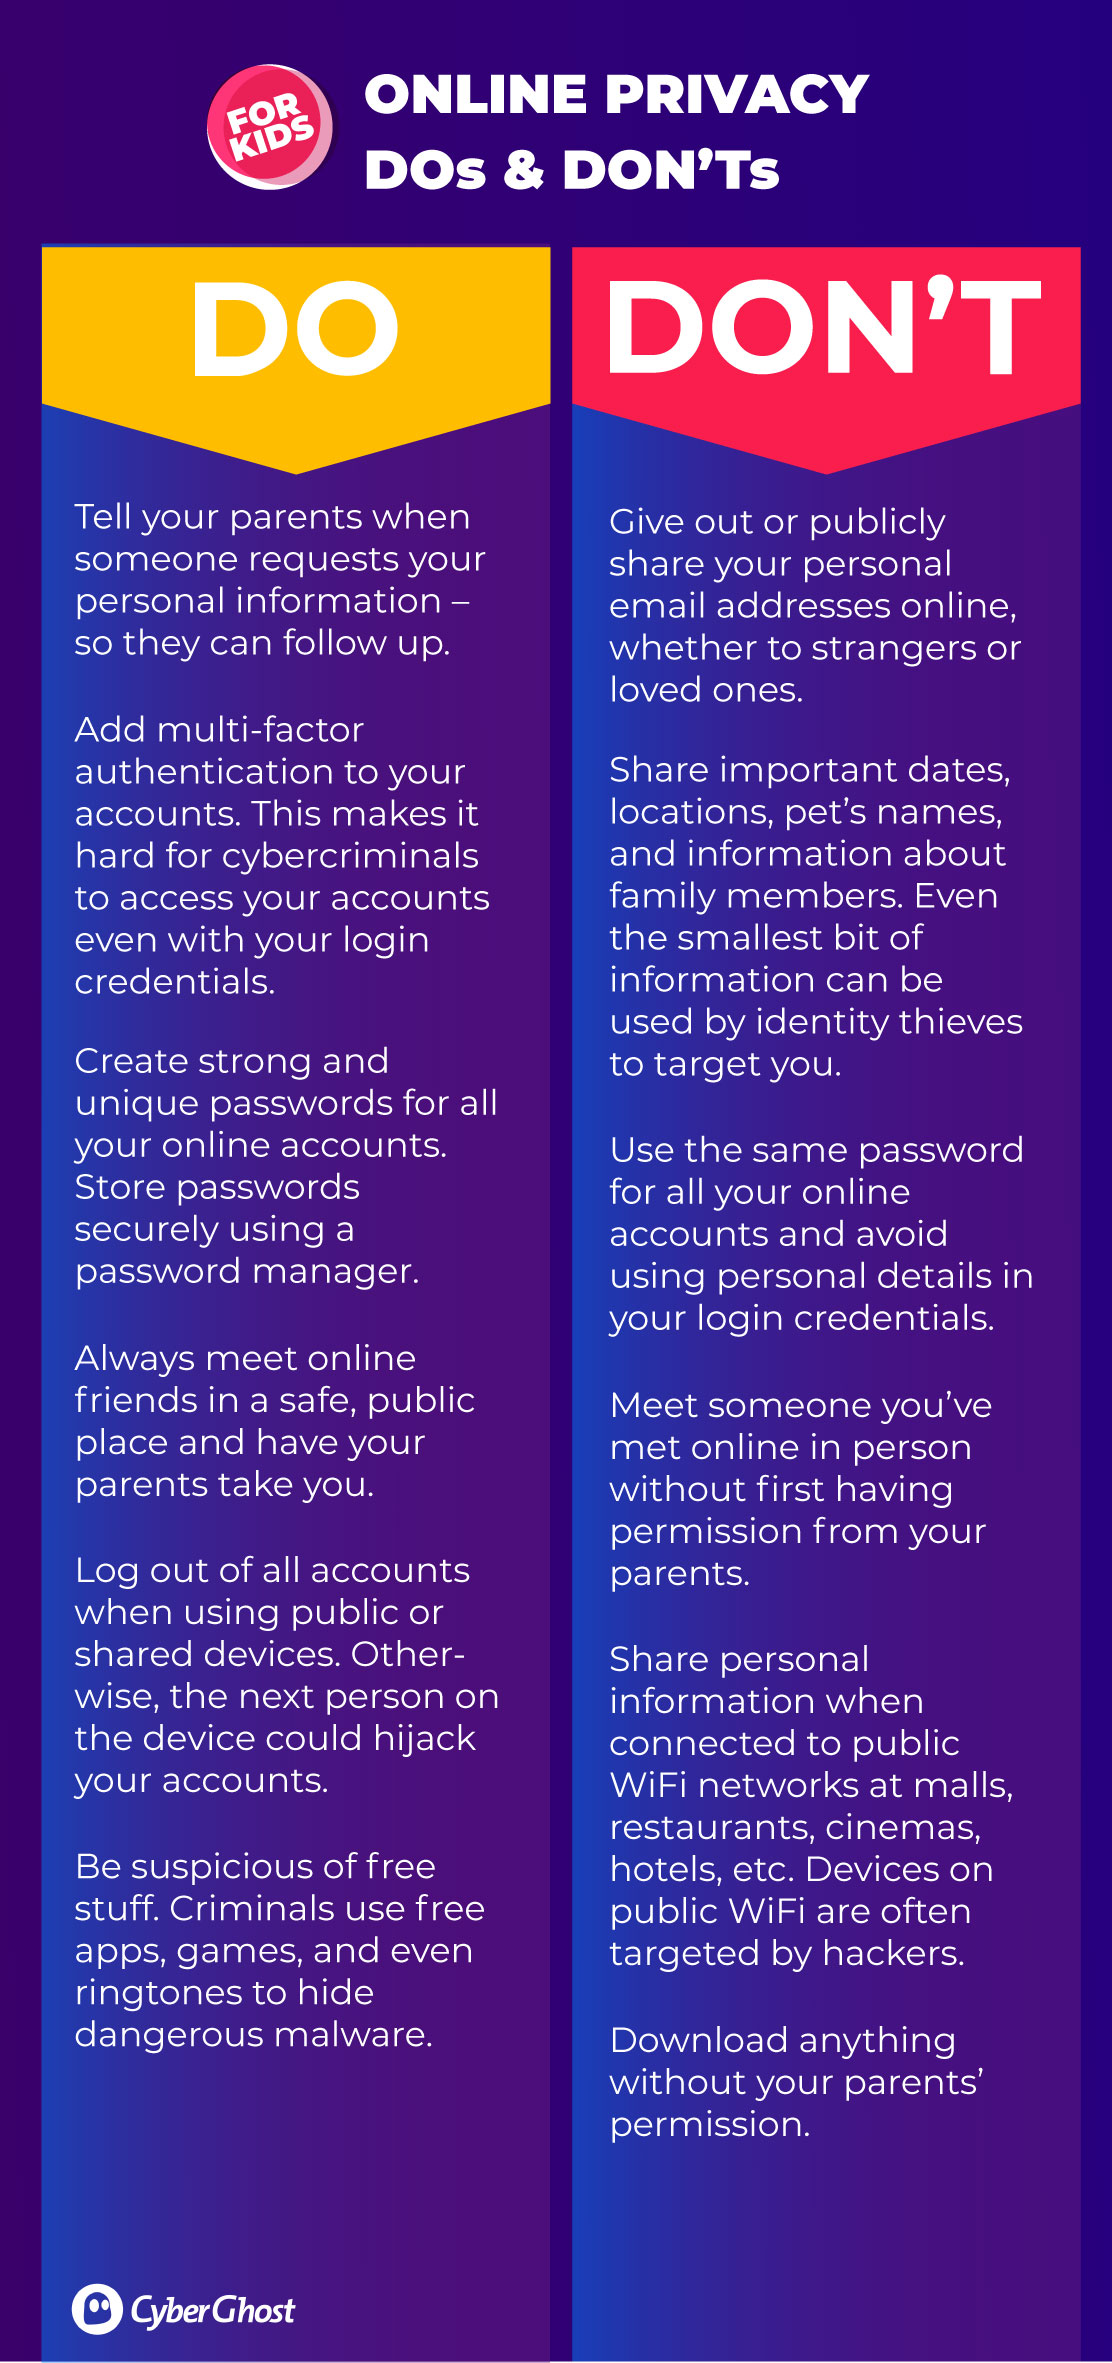 internet safety guide for kids - cyberghost privacy hub